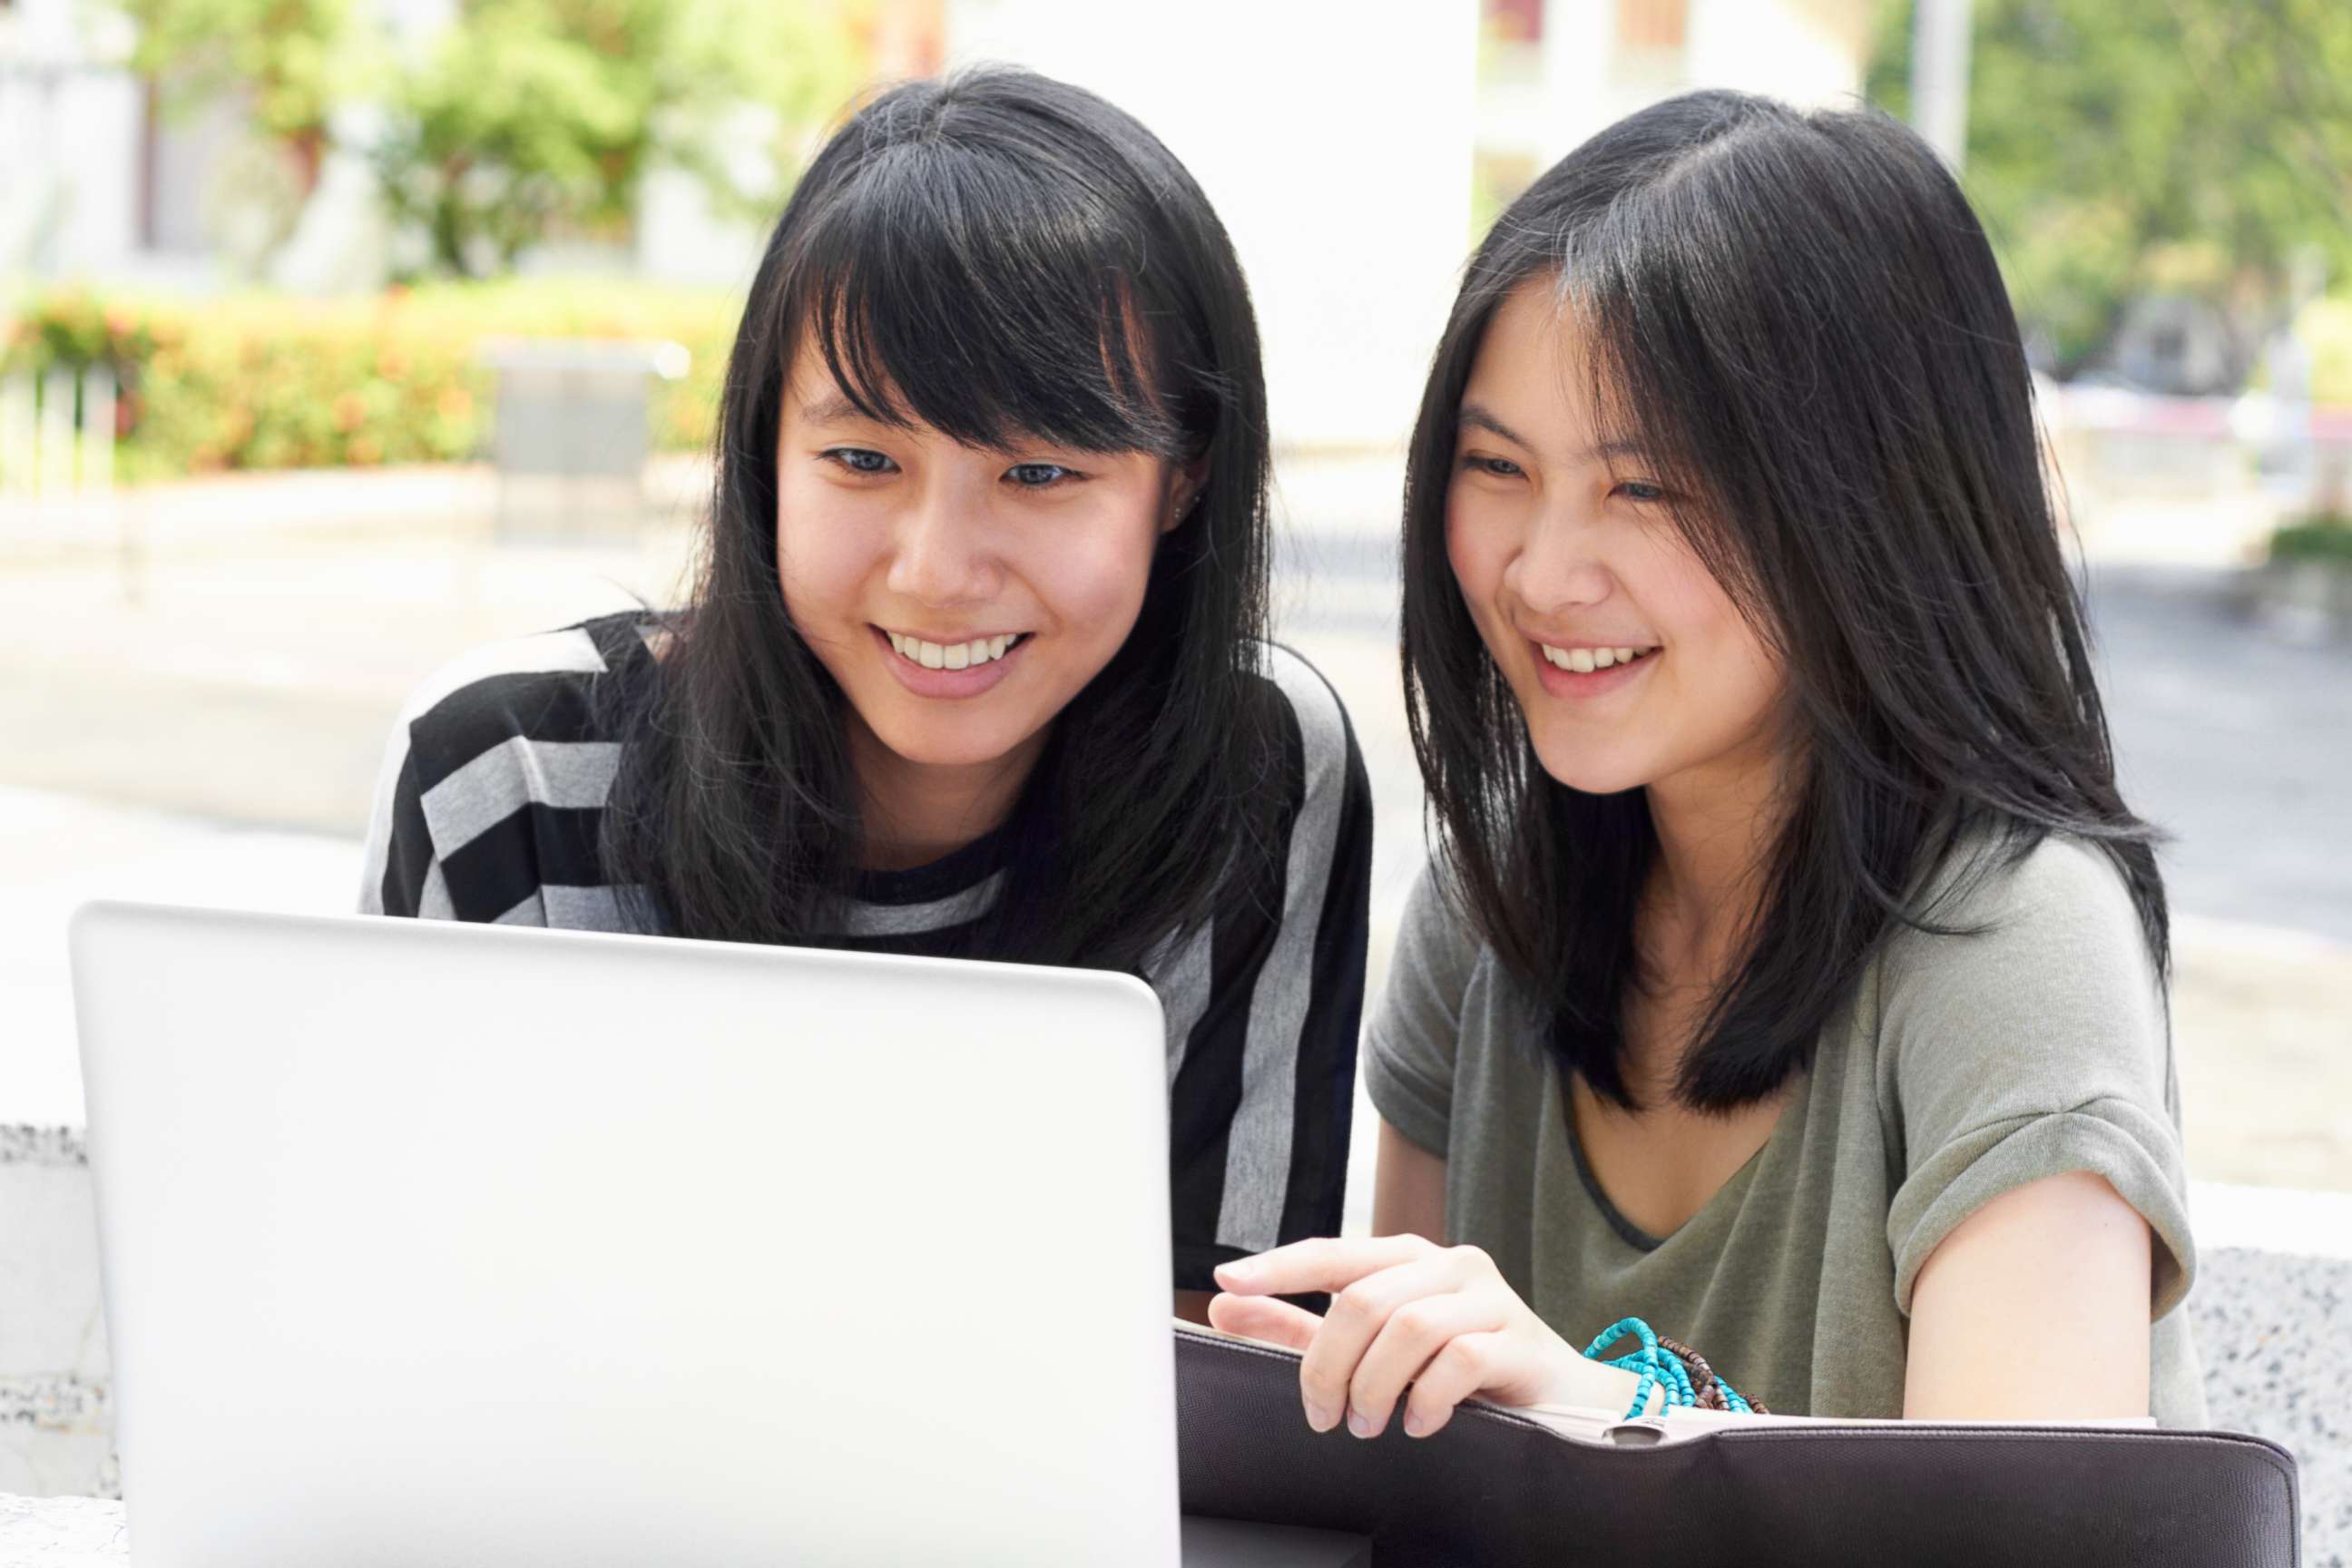 PHOTO: Two students sitting outside together appear in this undated stock photo.